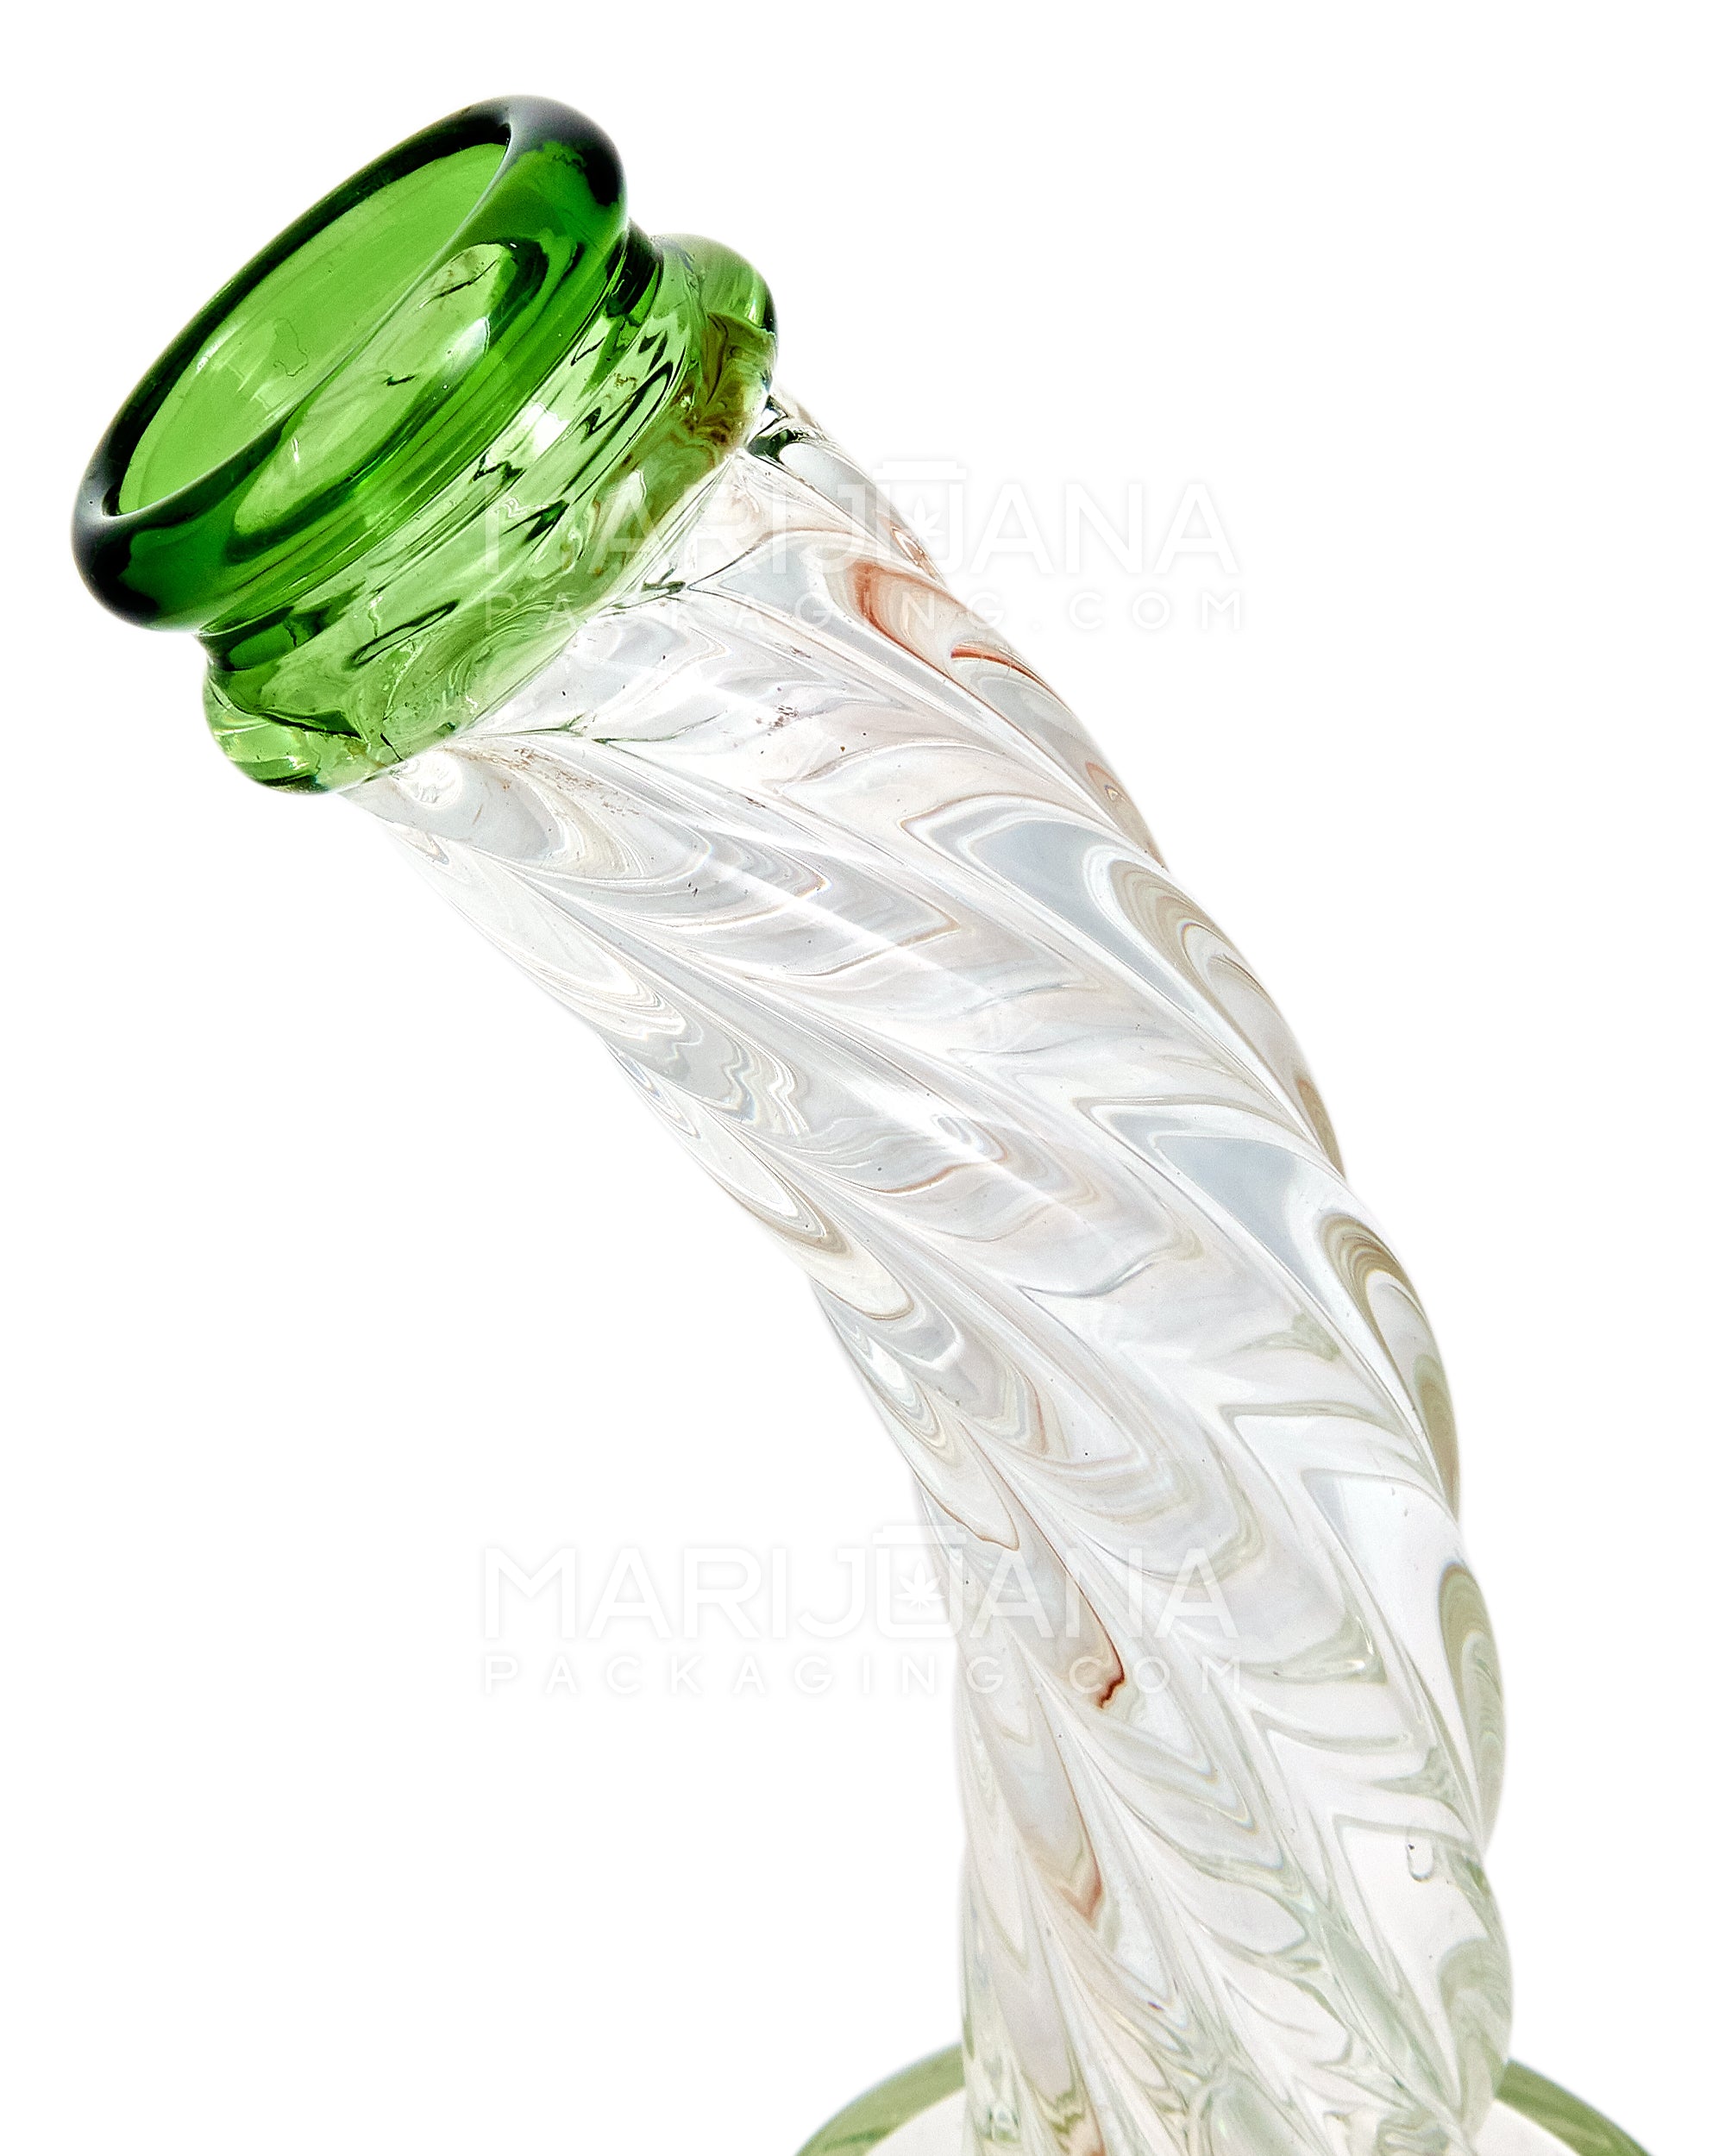 Spiral Neck Matrix Perc Glass Water Pipe w/ Thick Base | 8in Tall - 14mm Bowl - Green - 4